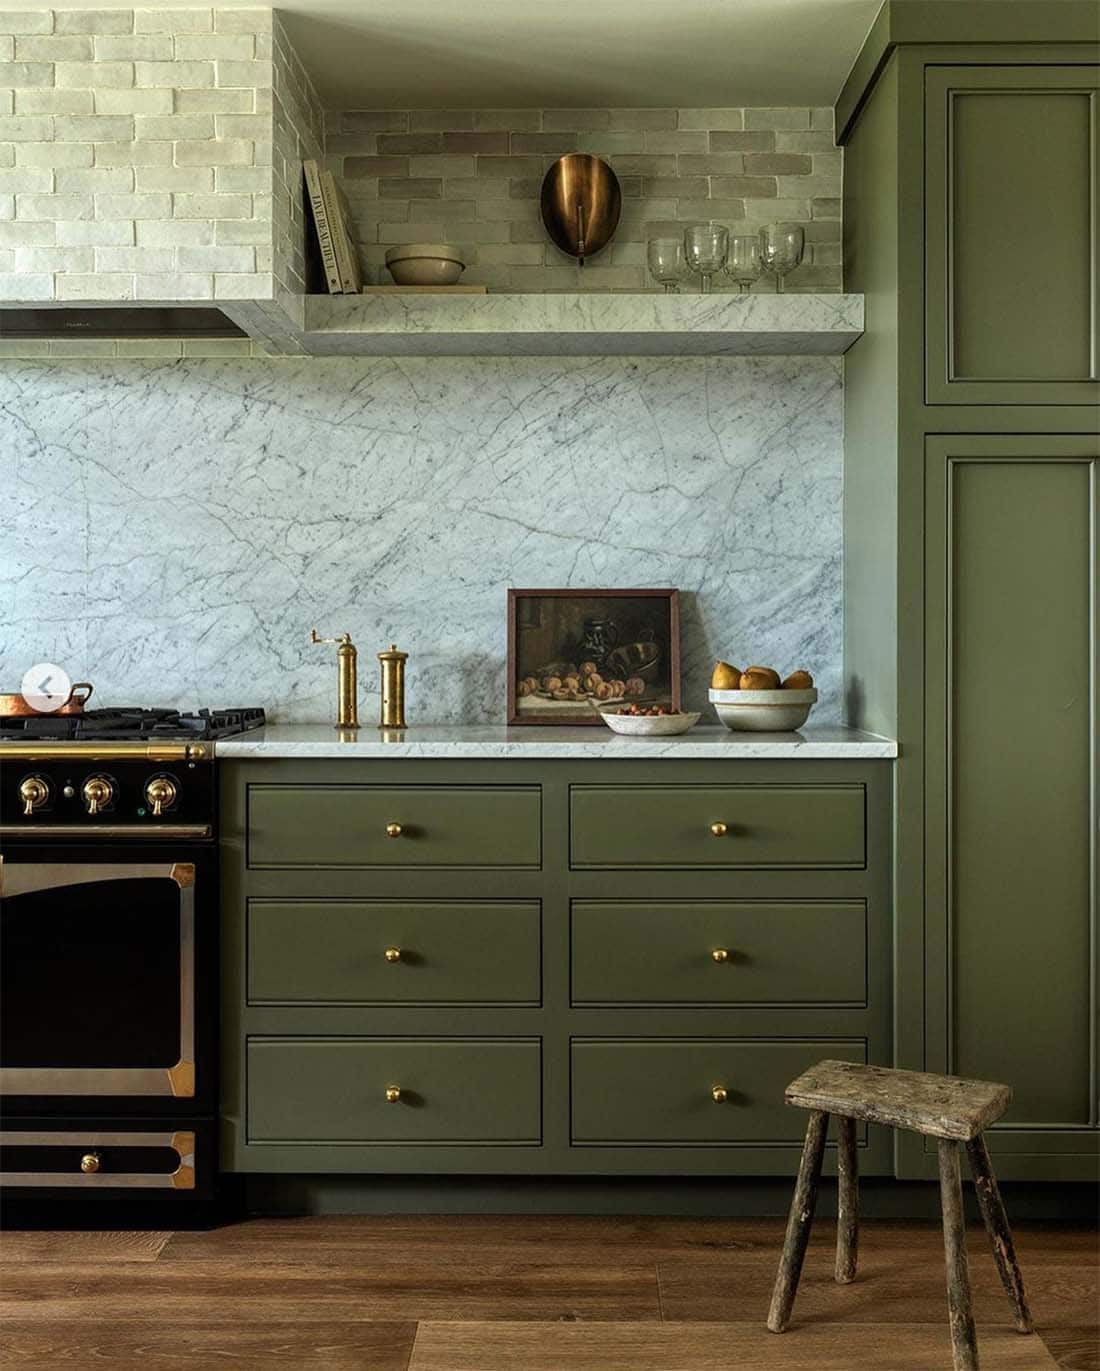 olive-green-kitchen-paint-color-for-cabinets-lightanddwell-chrismottalini-photo